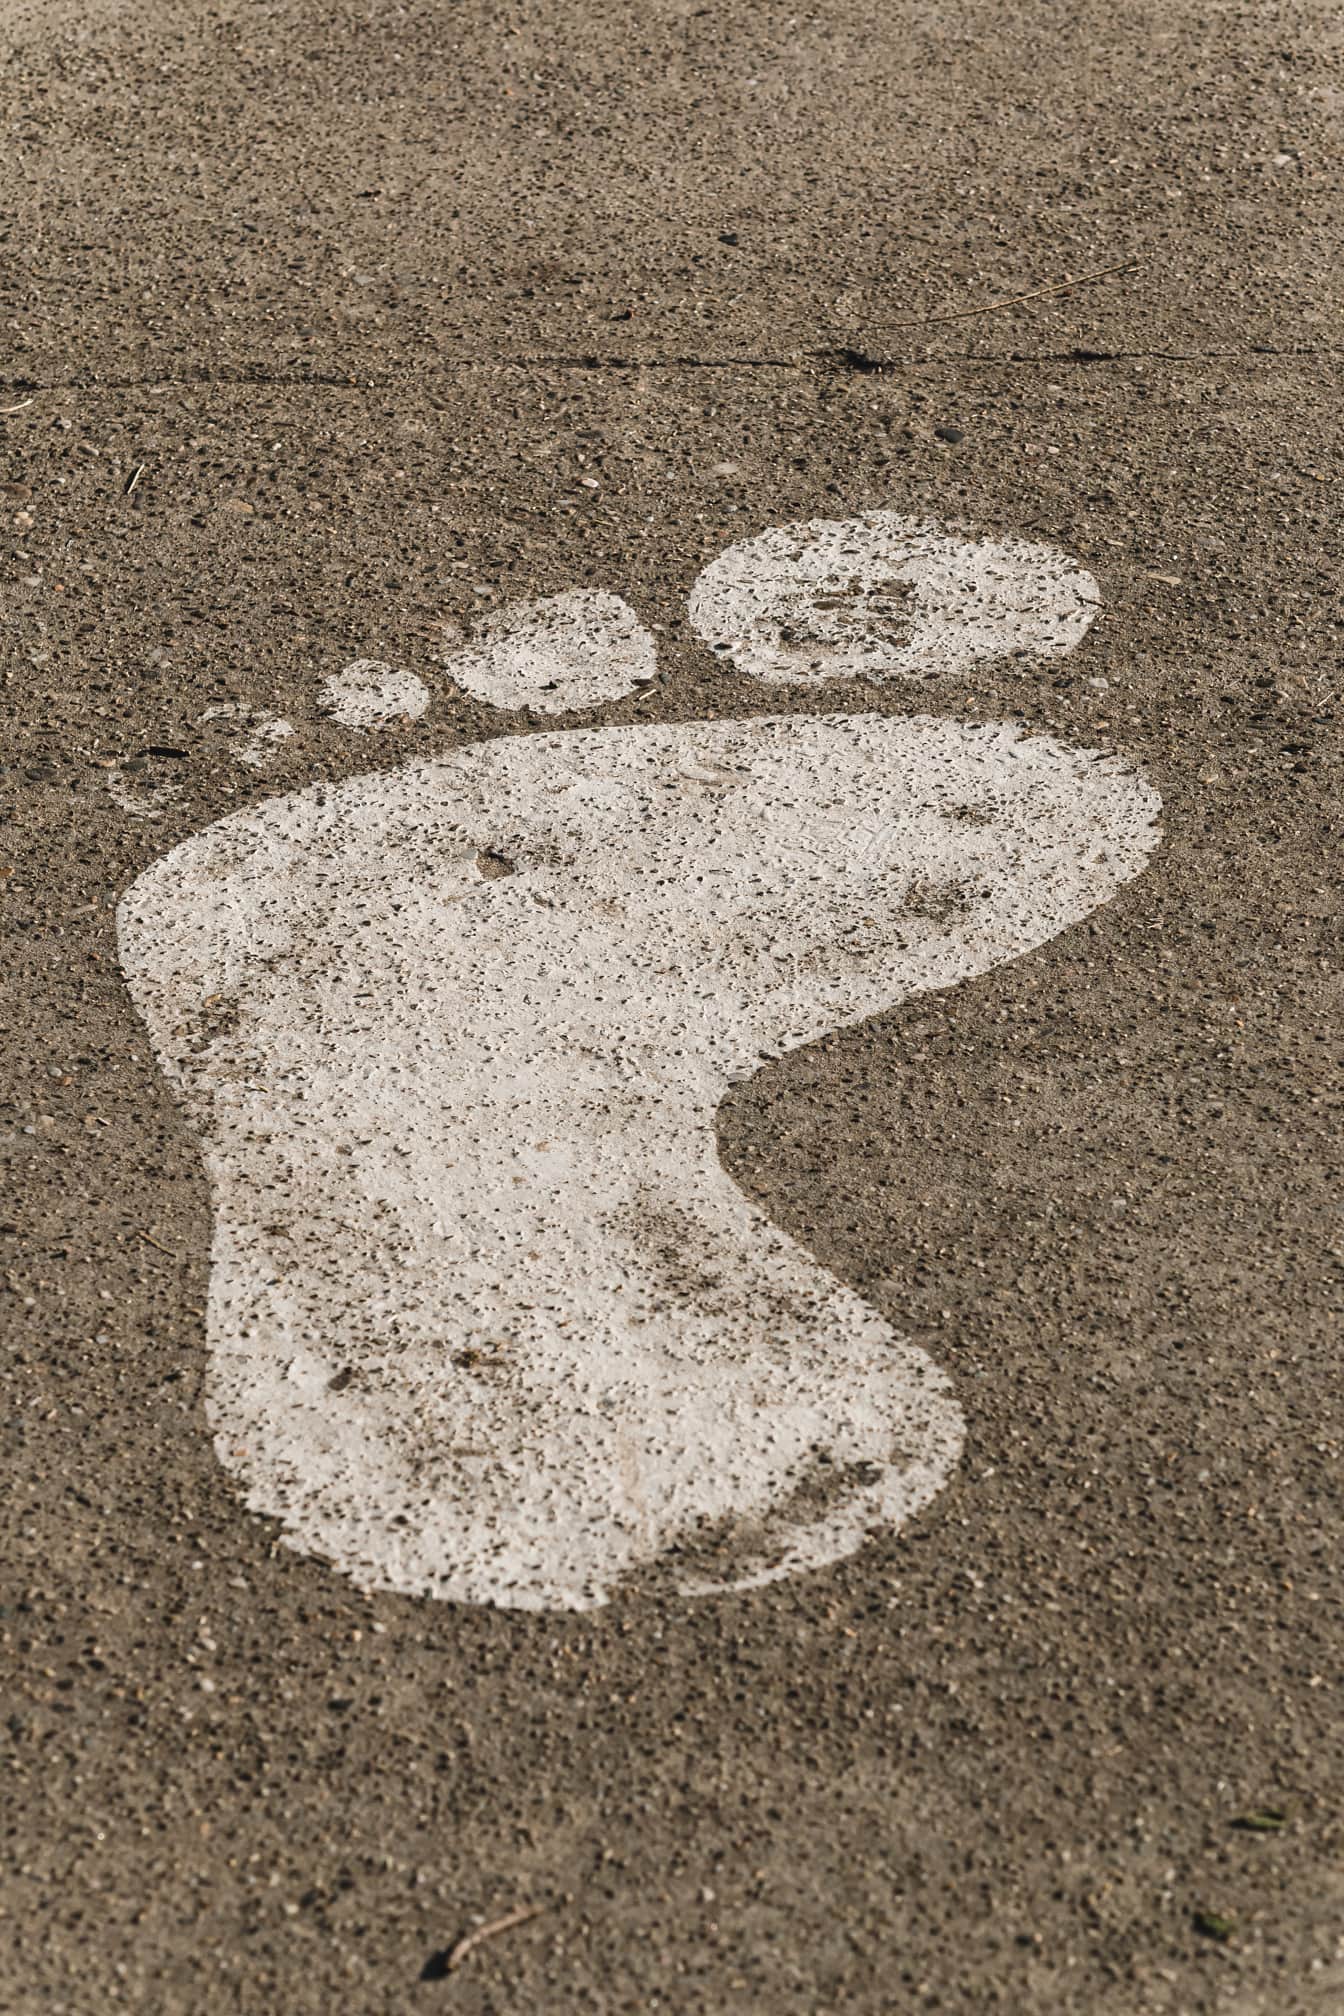 Close-up of white paint footprint sign on rough concrete